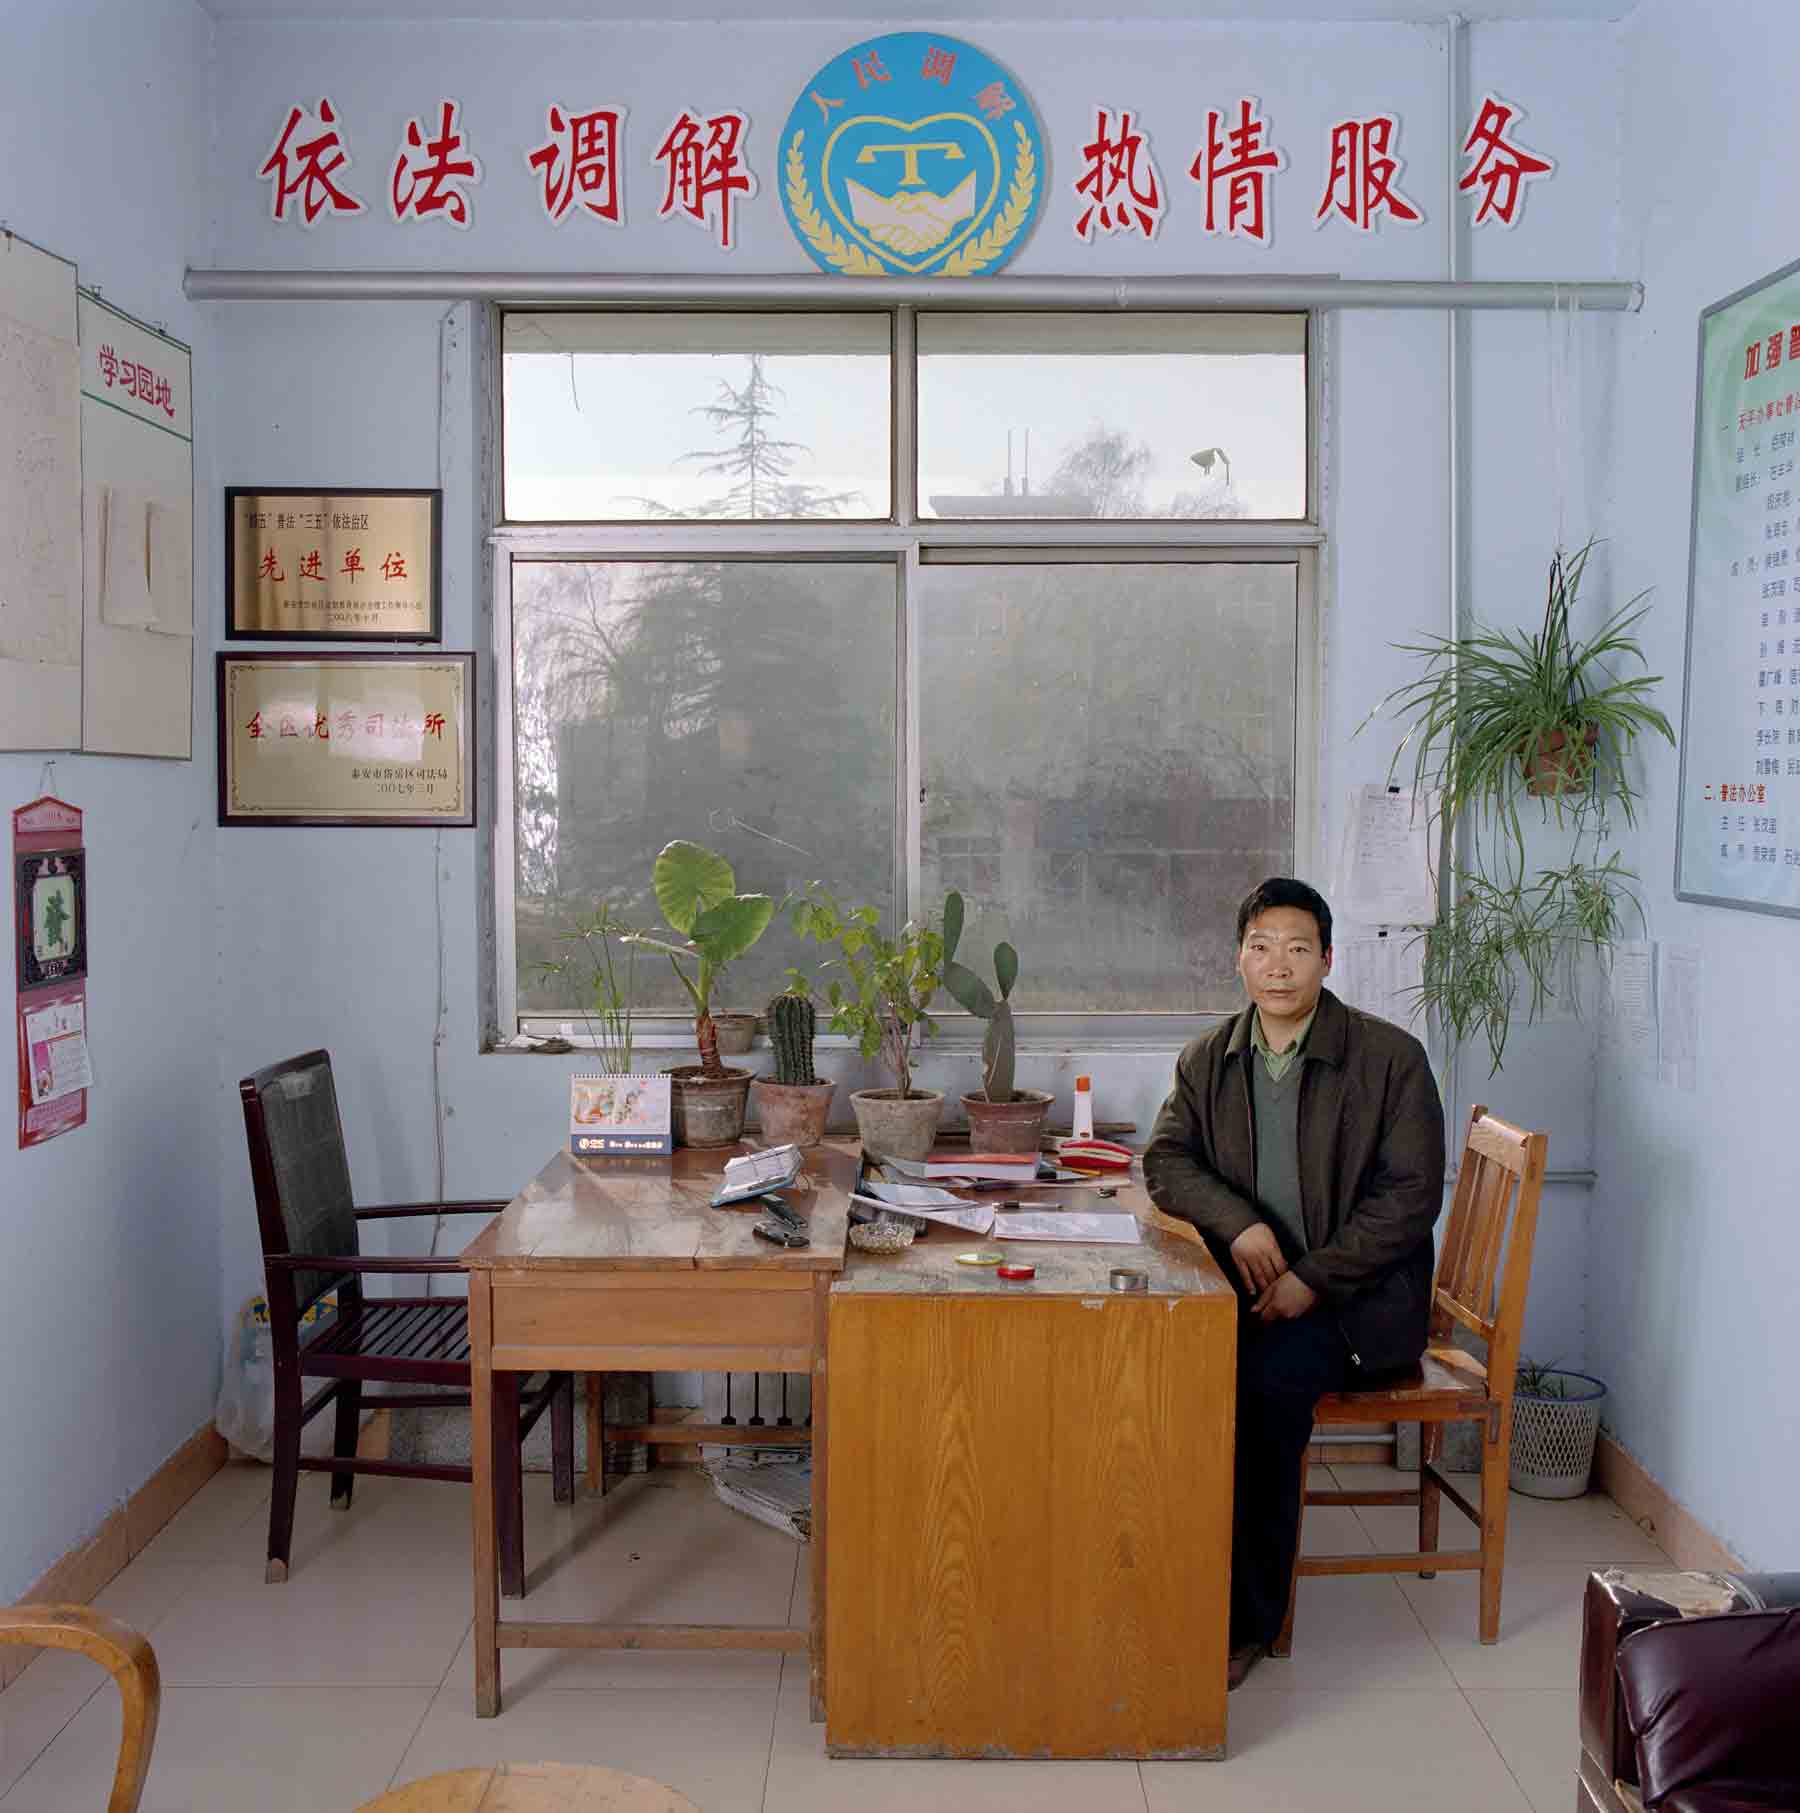 China-22/2007 [Tie.,ZMG (b. 1966)]
Zhang Mao Guo (b. 1966), employed by the Office of Justice, is an official teacher of Justice and Values to villagers in Tianping Town, Daiyue District, Taian City, Shandong province. Monthly salary: 1,500 renminbi ($ 186, 138 euro).